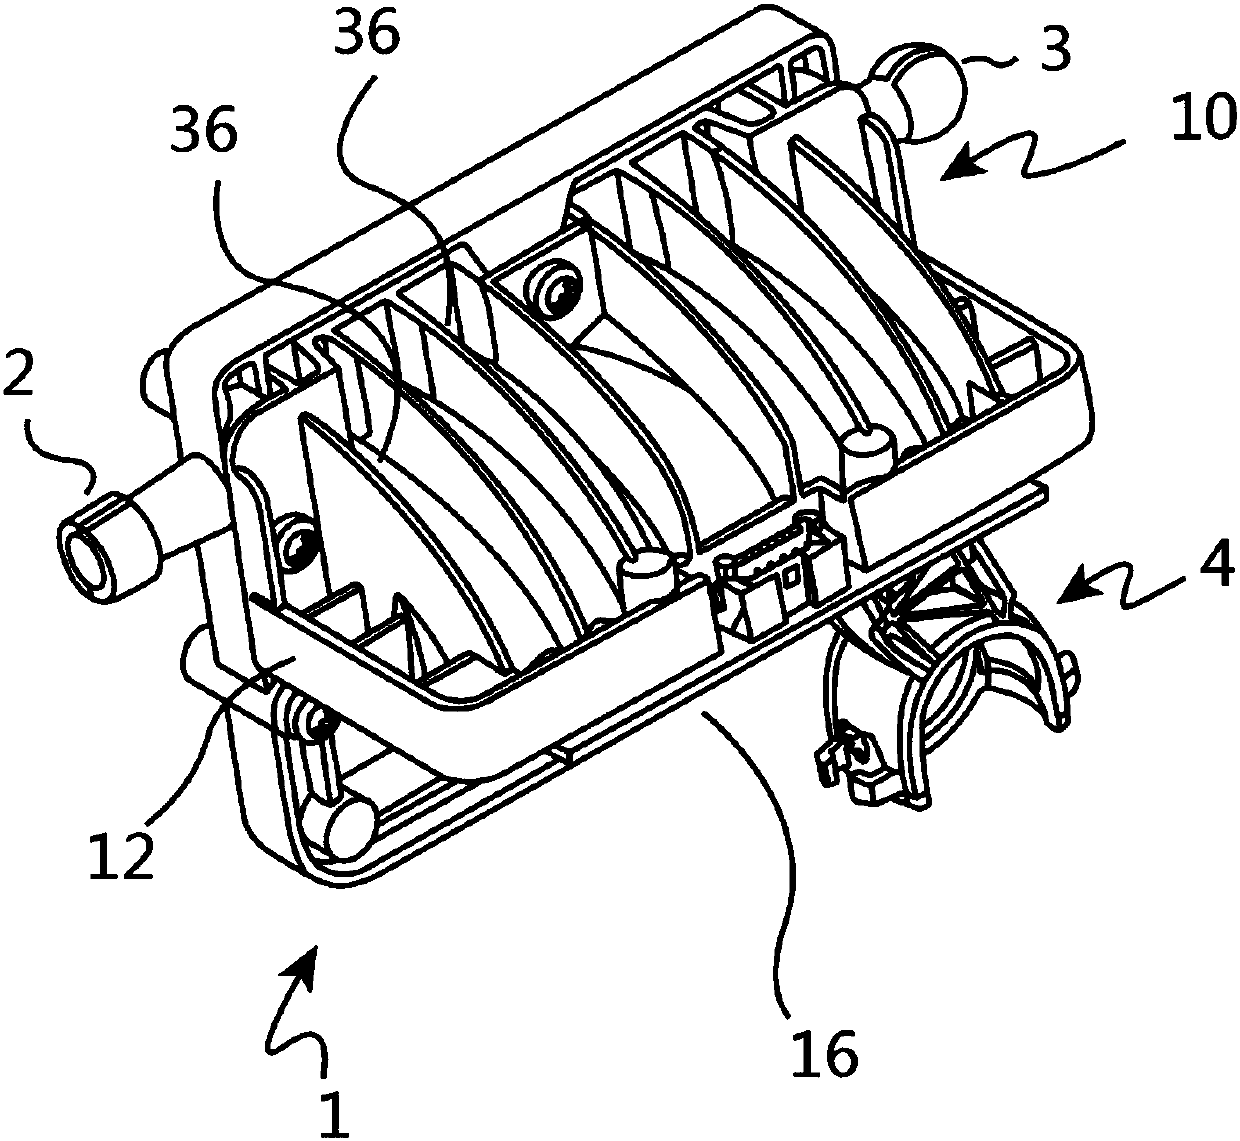 Multi-component reflector for light module of a motor vehicle headlight